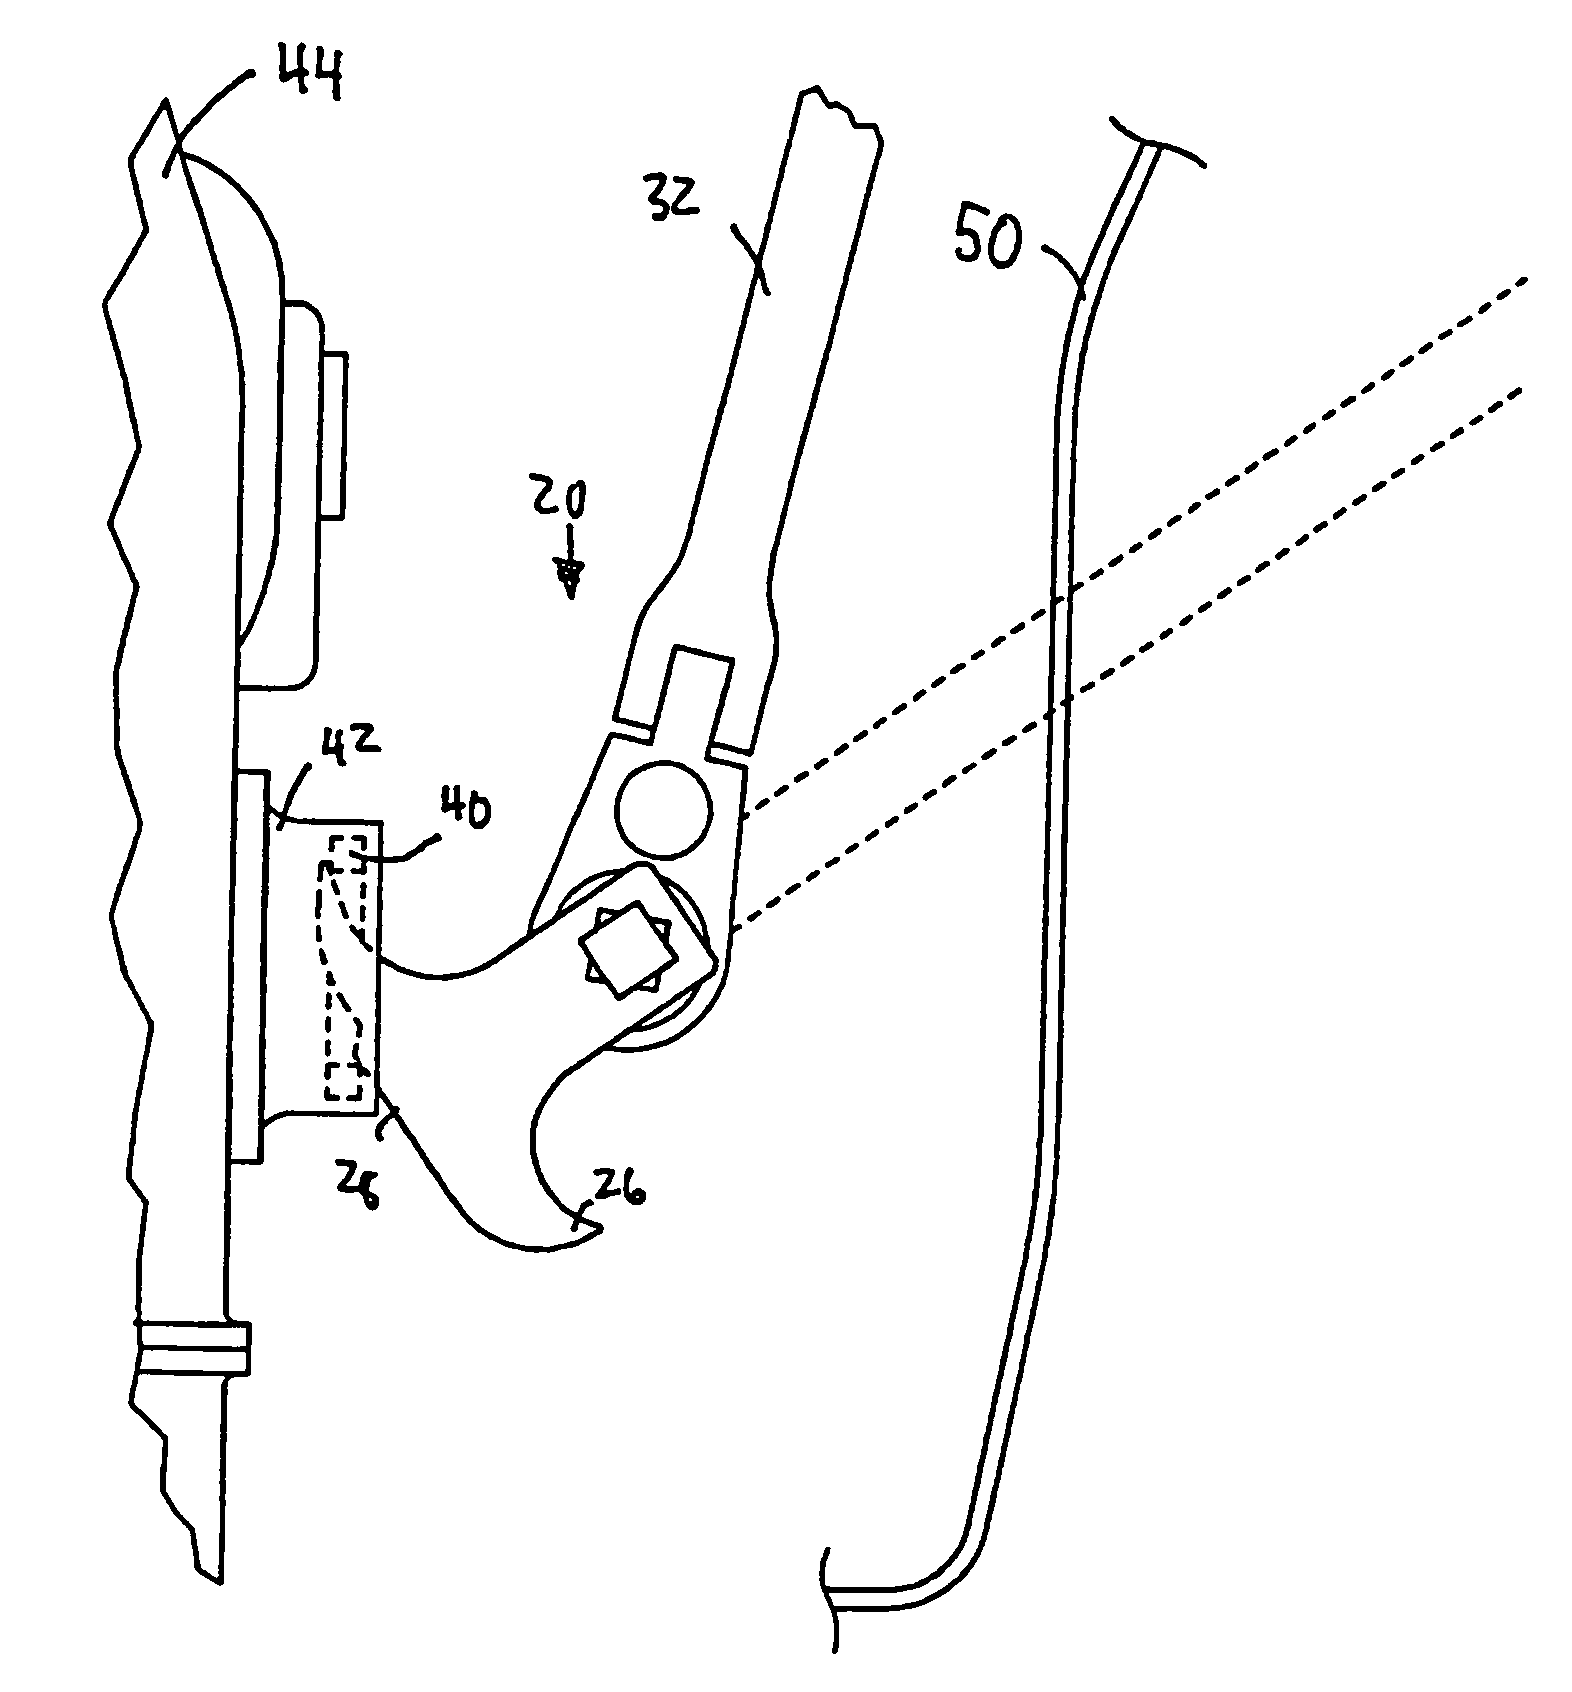 Prying tool with positionable handle